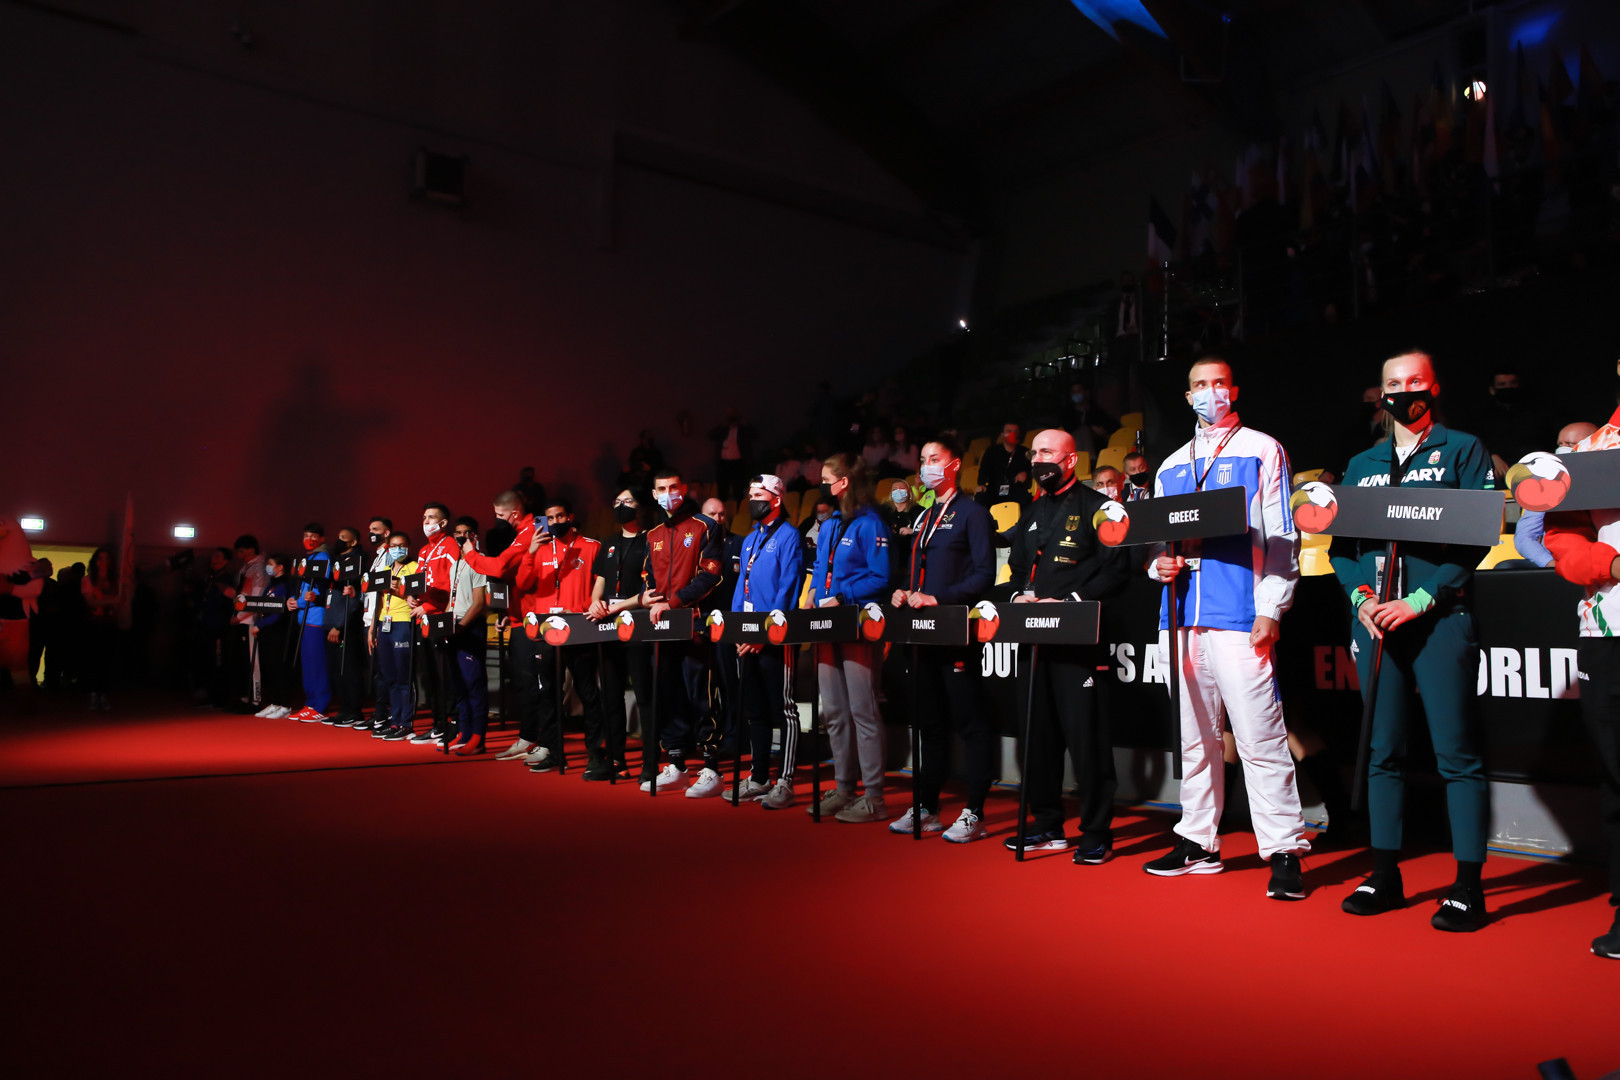 The AIBA World Youth Boxing Championship opened in Kielce in Poland with competitors from 52 countries ©AIBA